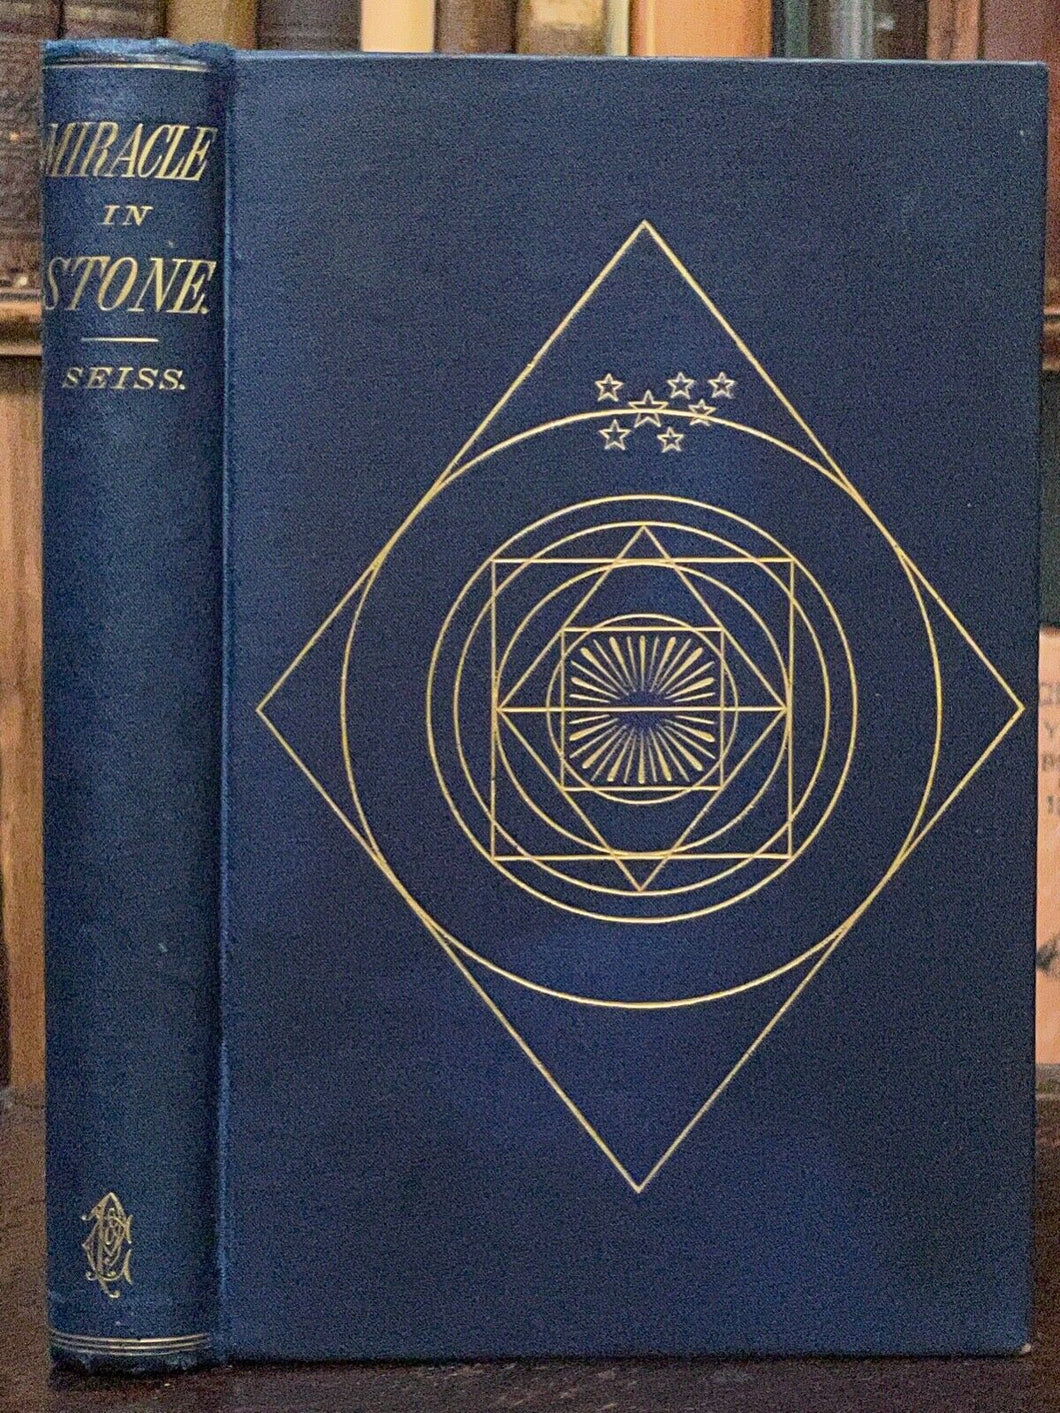 MIRACLE IN STONE OR THE GREAT PYRAMID OF EGYPT - Seiss, 1877 ANCIENT OCCULT